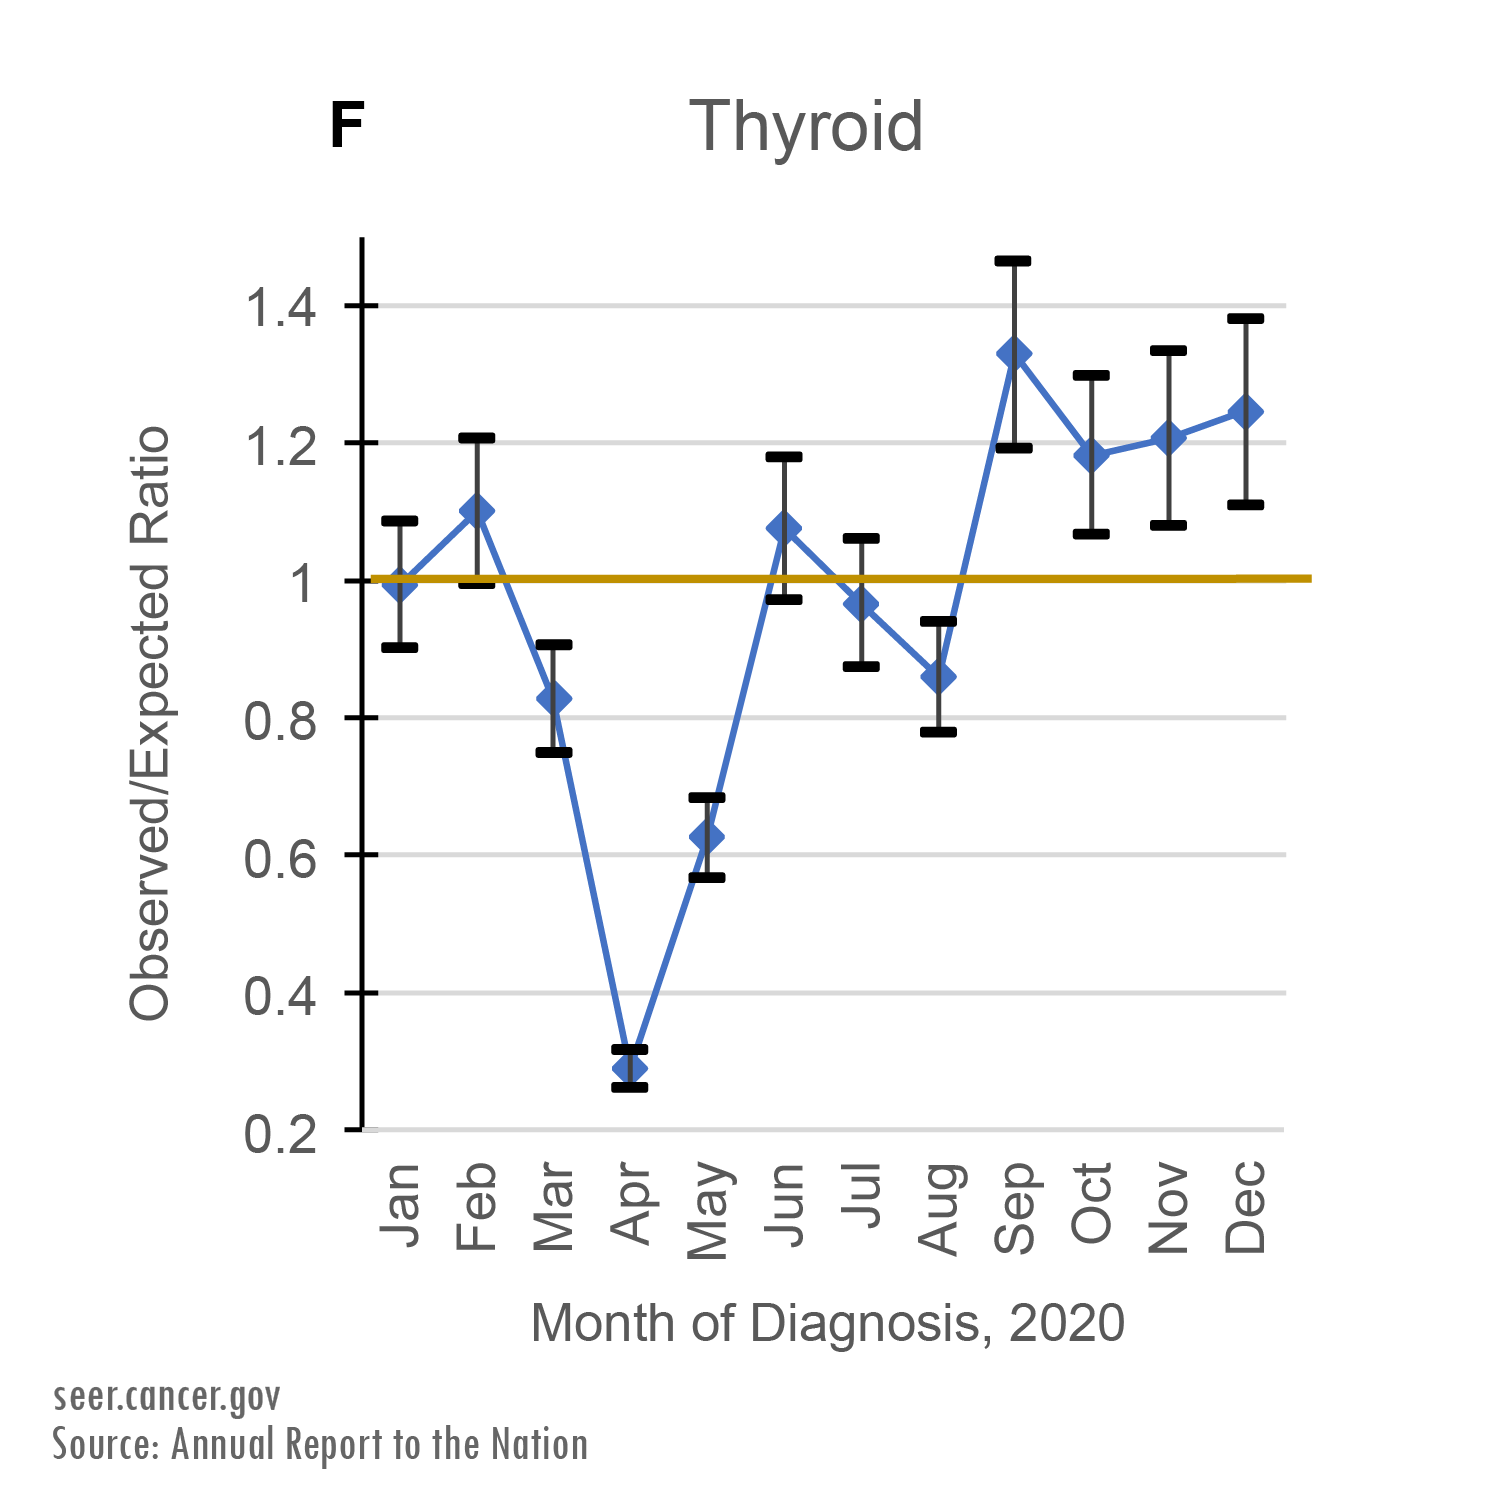 Observed/Expected Ratio of Thyroid cancer diagnoses by Month of Diagnosis, 2020. Between March and May of 2020, cancer registries recorded far fewer cases than expected. While the rate of new cancer diagnoses hovered around predicted levels in the second half of 2020, it did not make up for the drop seen between March and May.